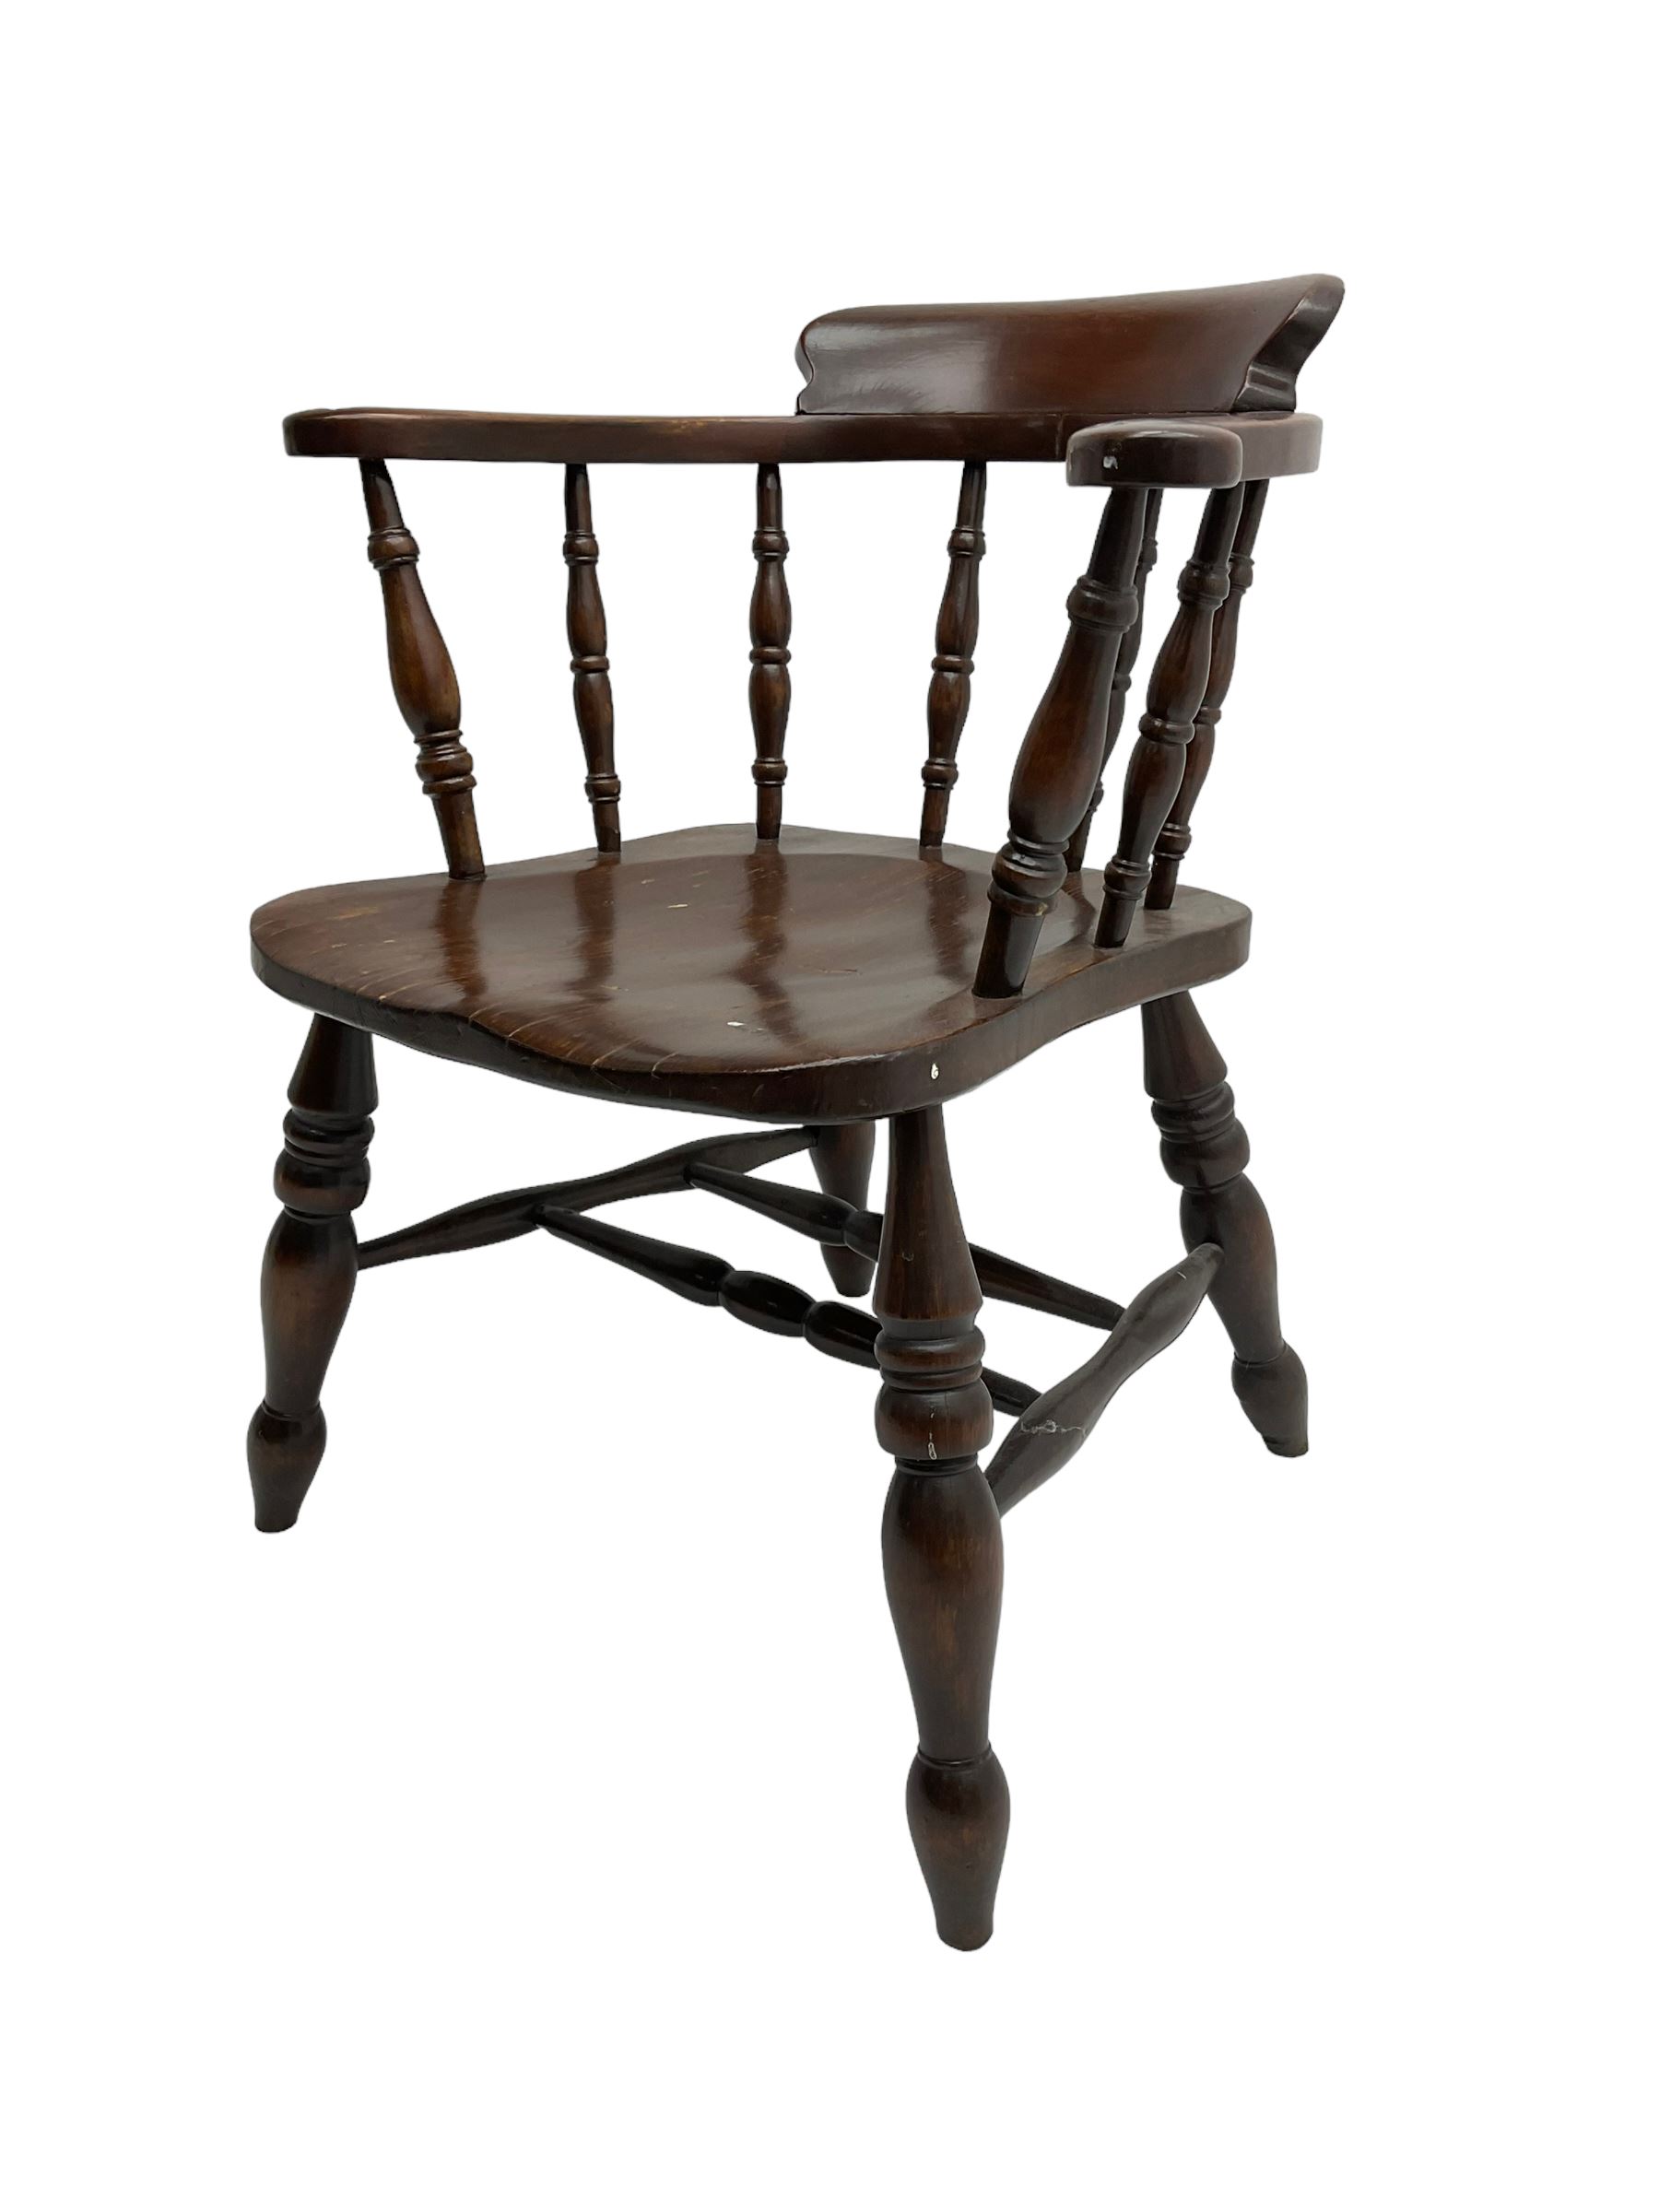 20th century elm and beech Captain's elbow chair - Image 3 of 6